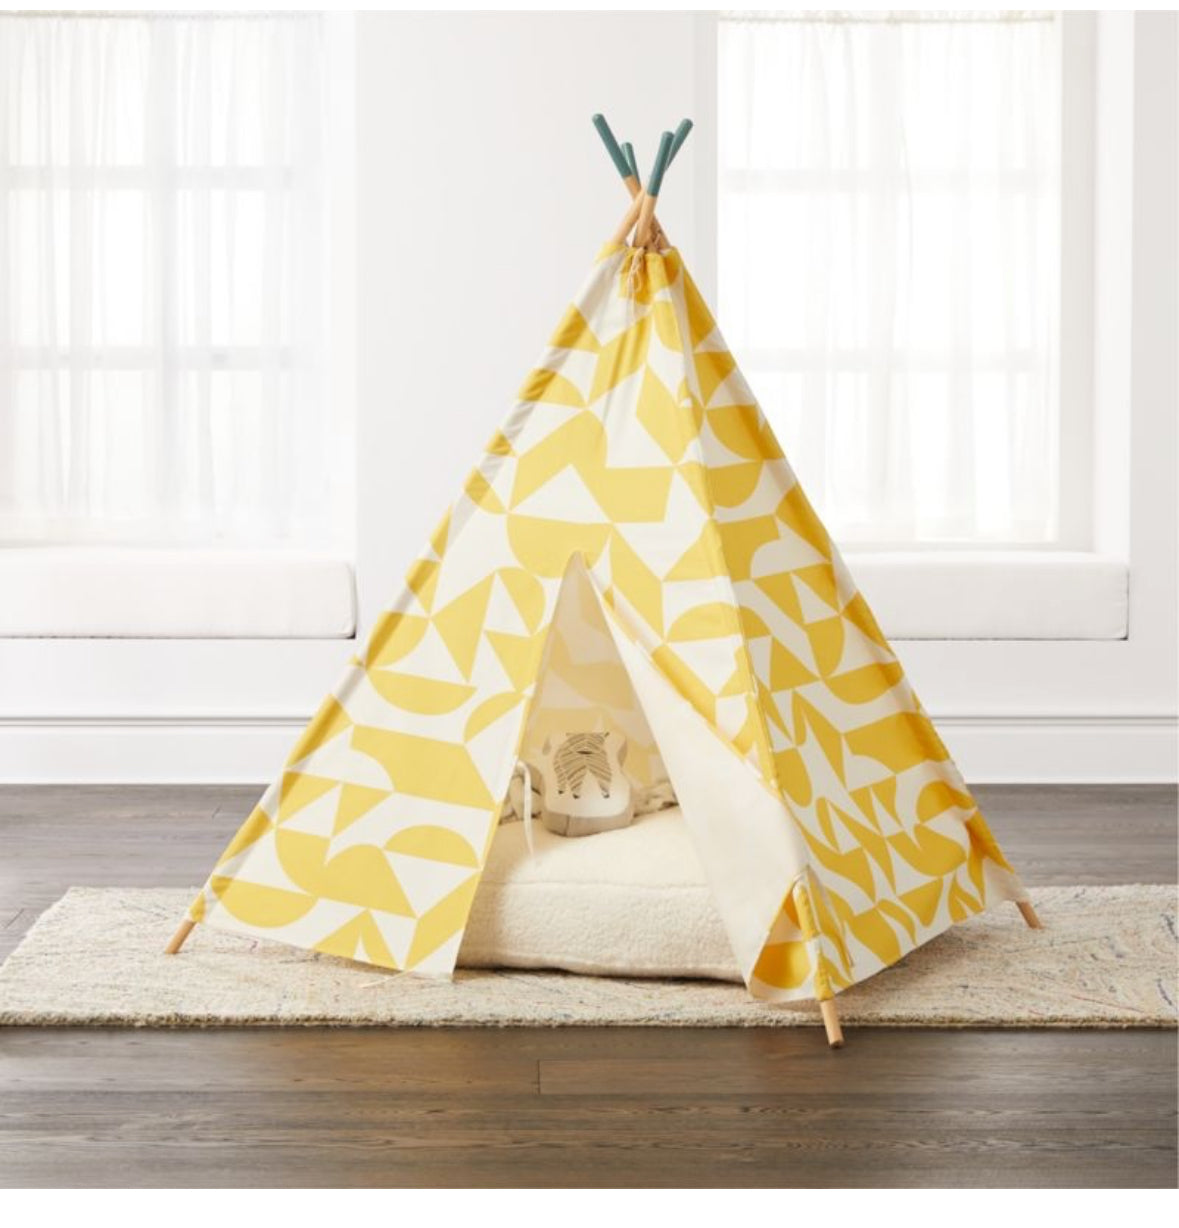 Crate and Barrel Geometric Yellow Teepee Tent with pillow, EUC ***PPU only item 45208**